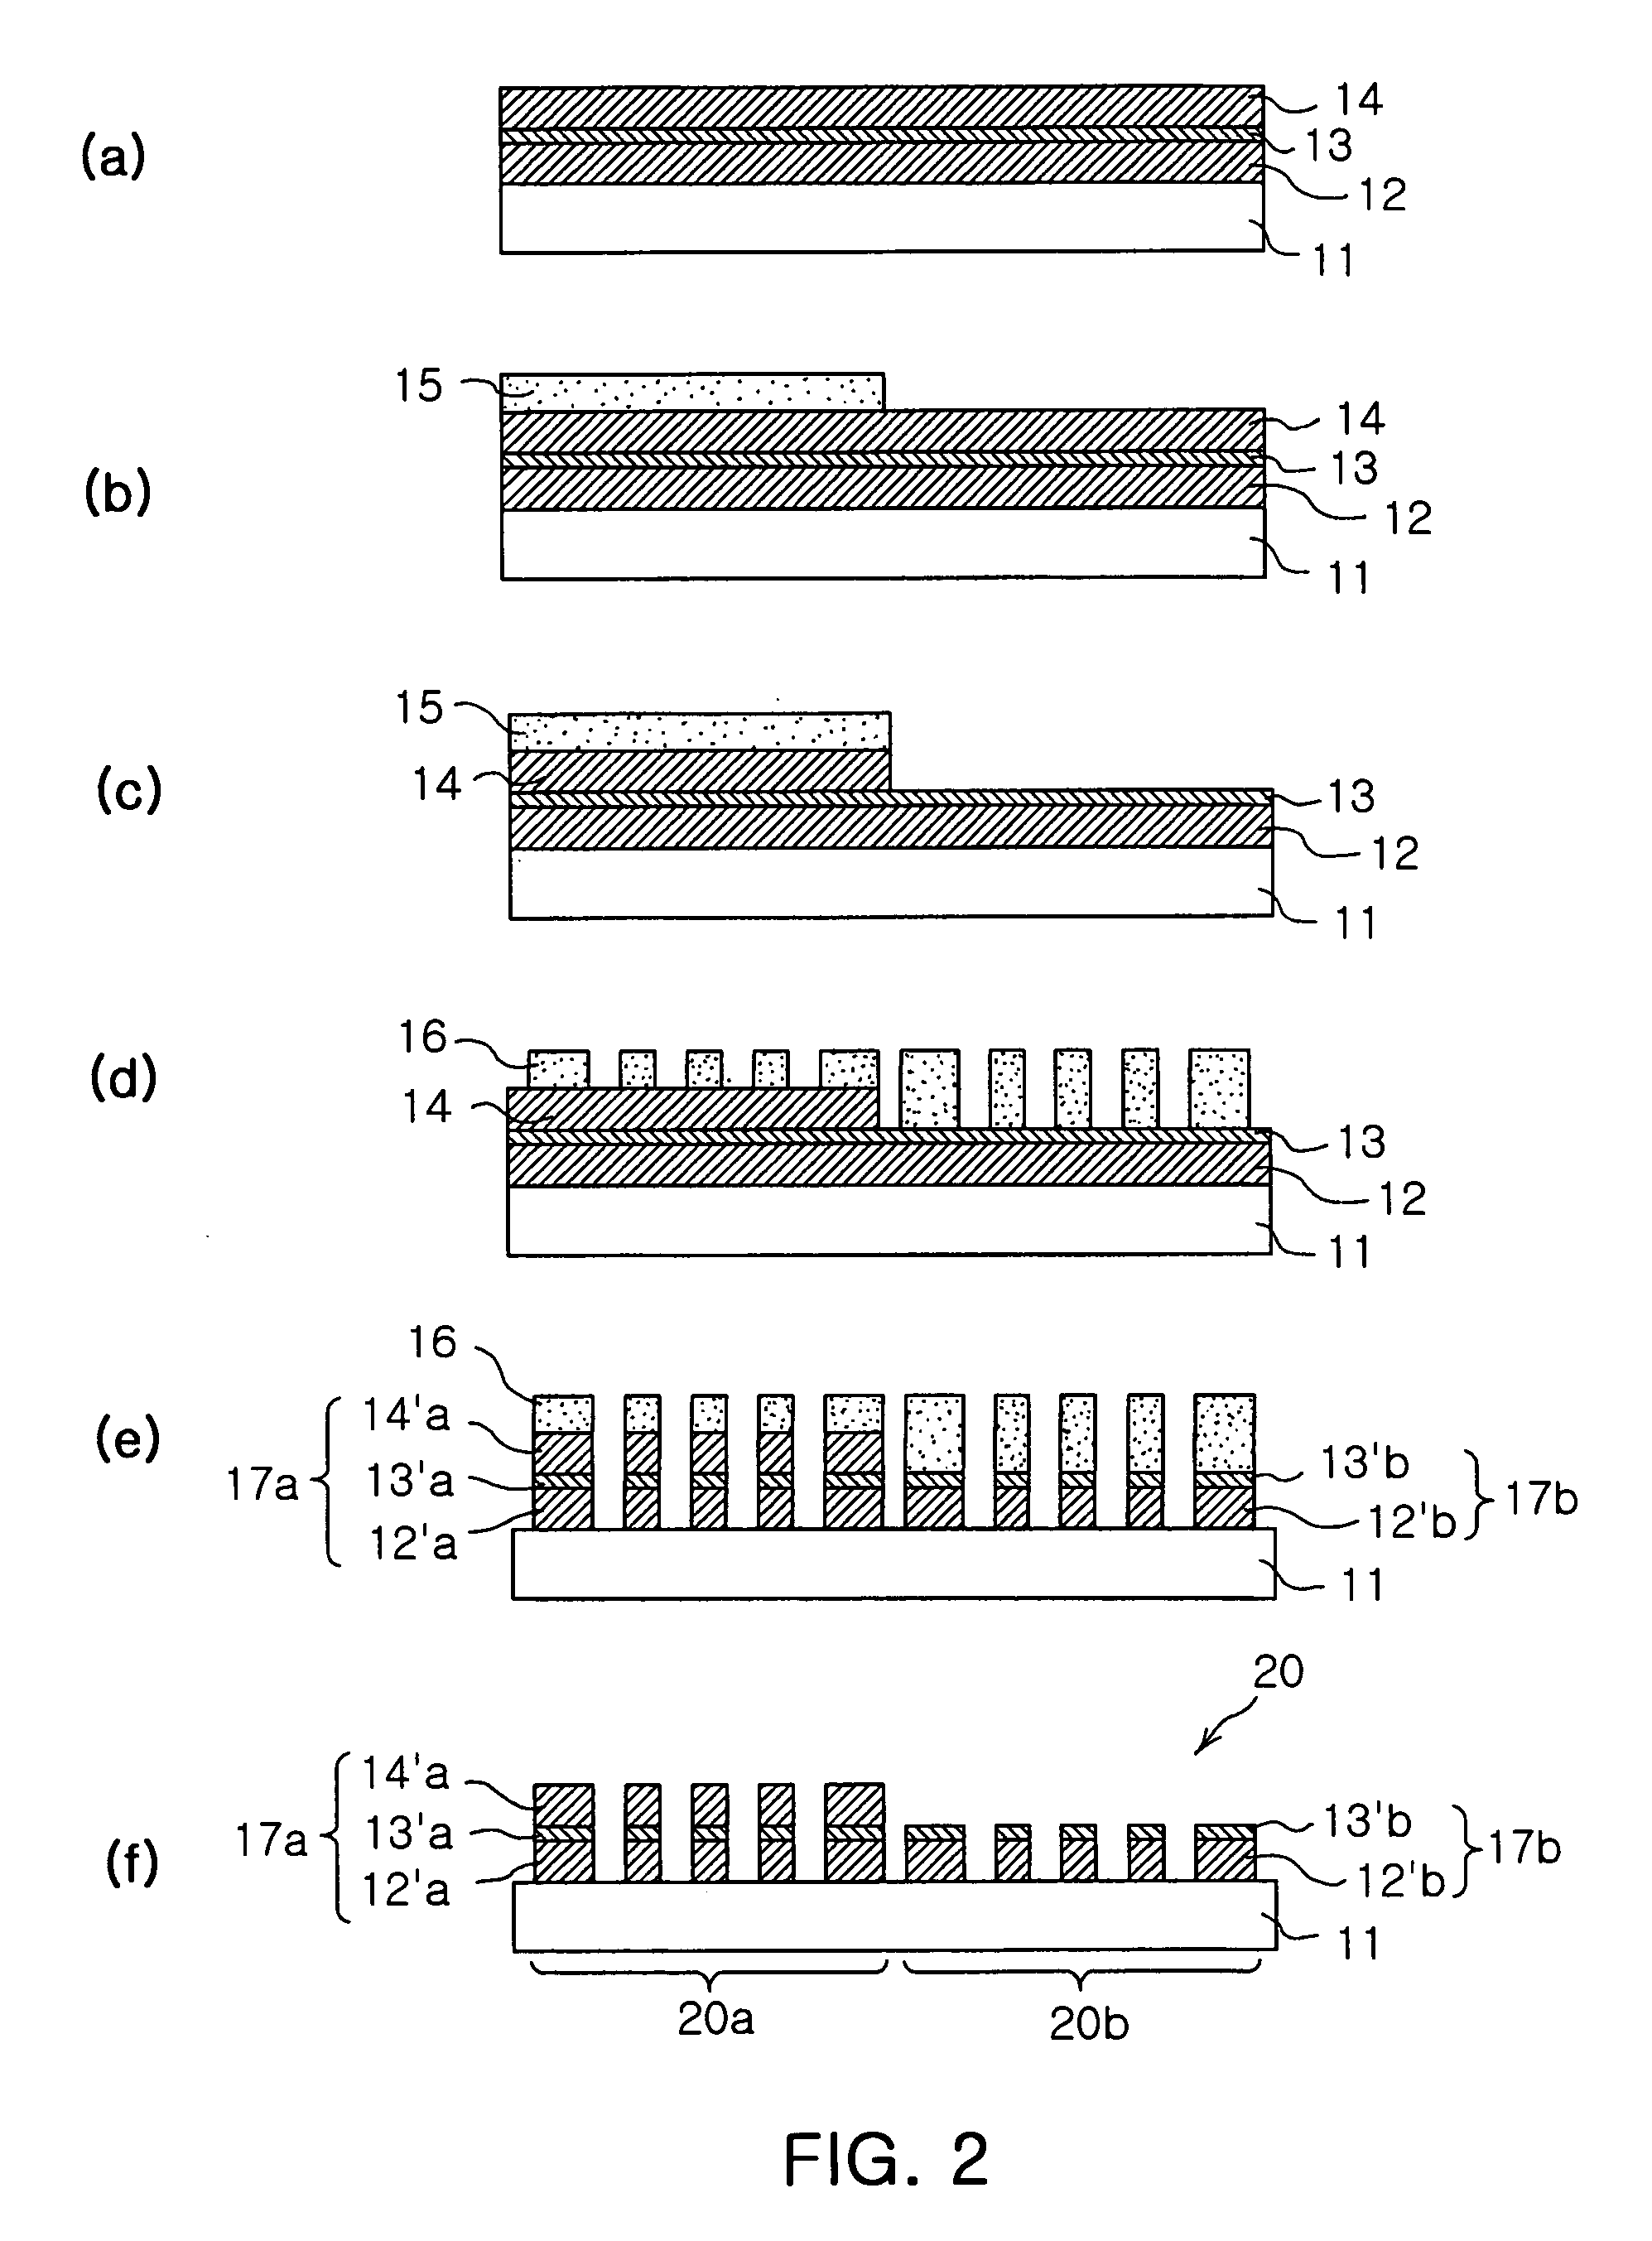 Fabrication method of multiple band surface acoustic wave devices